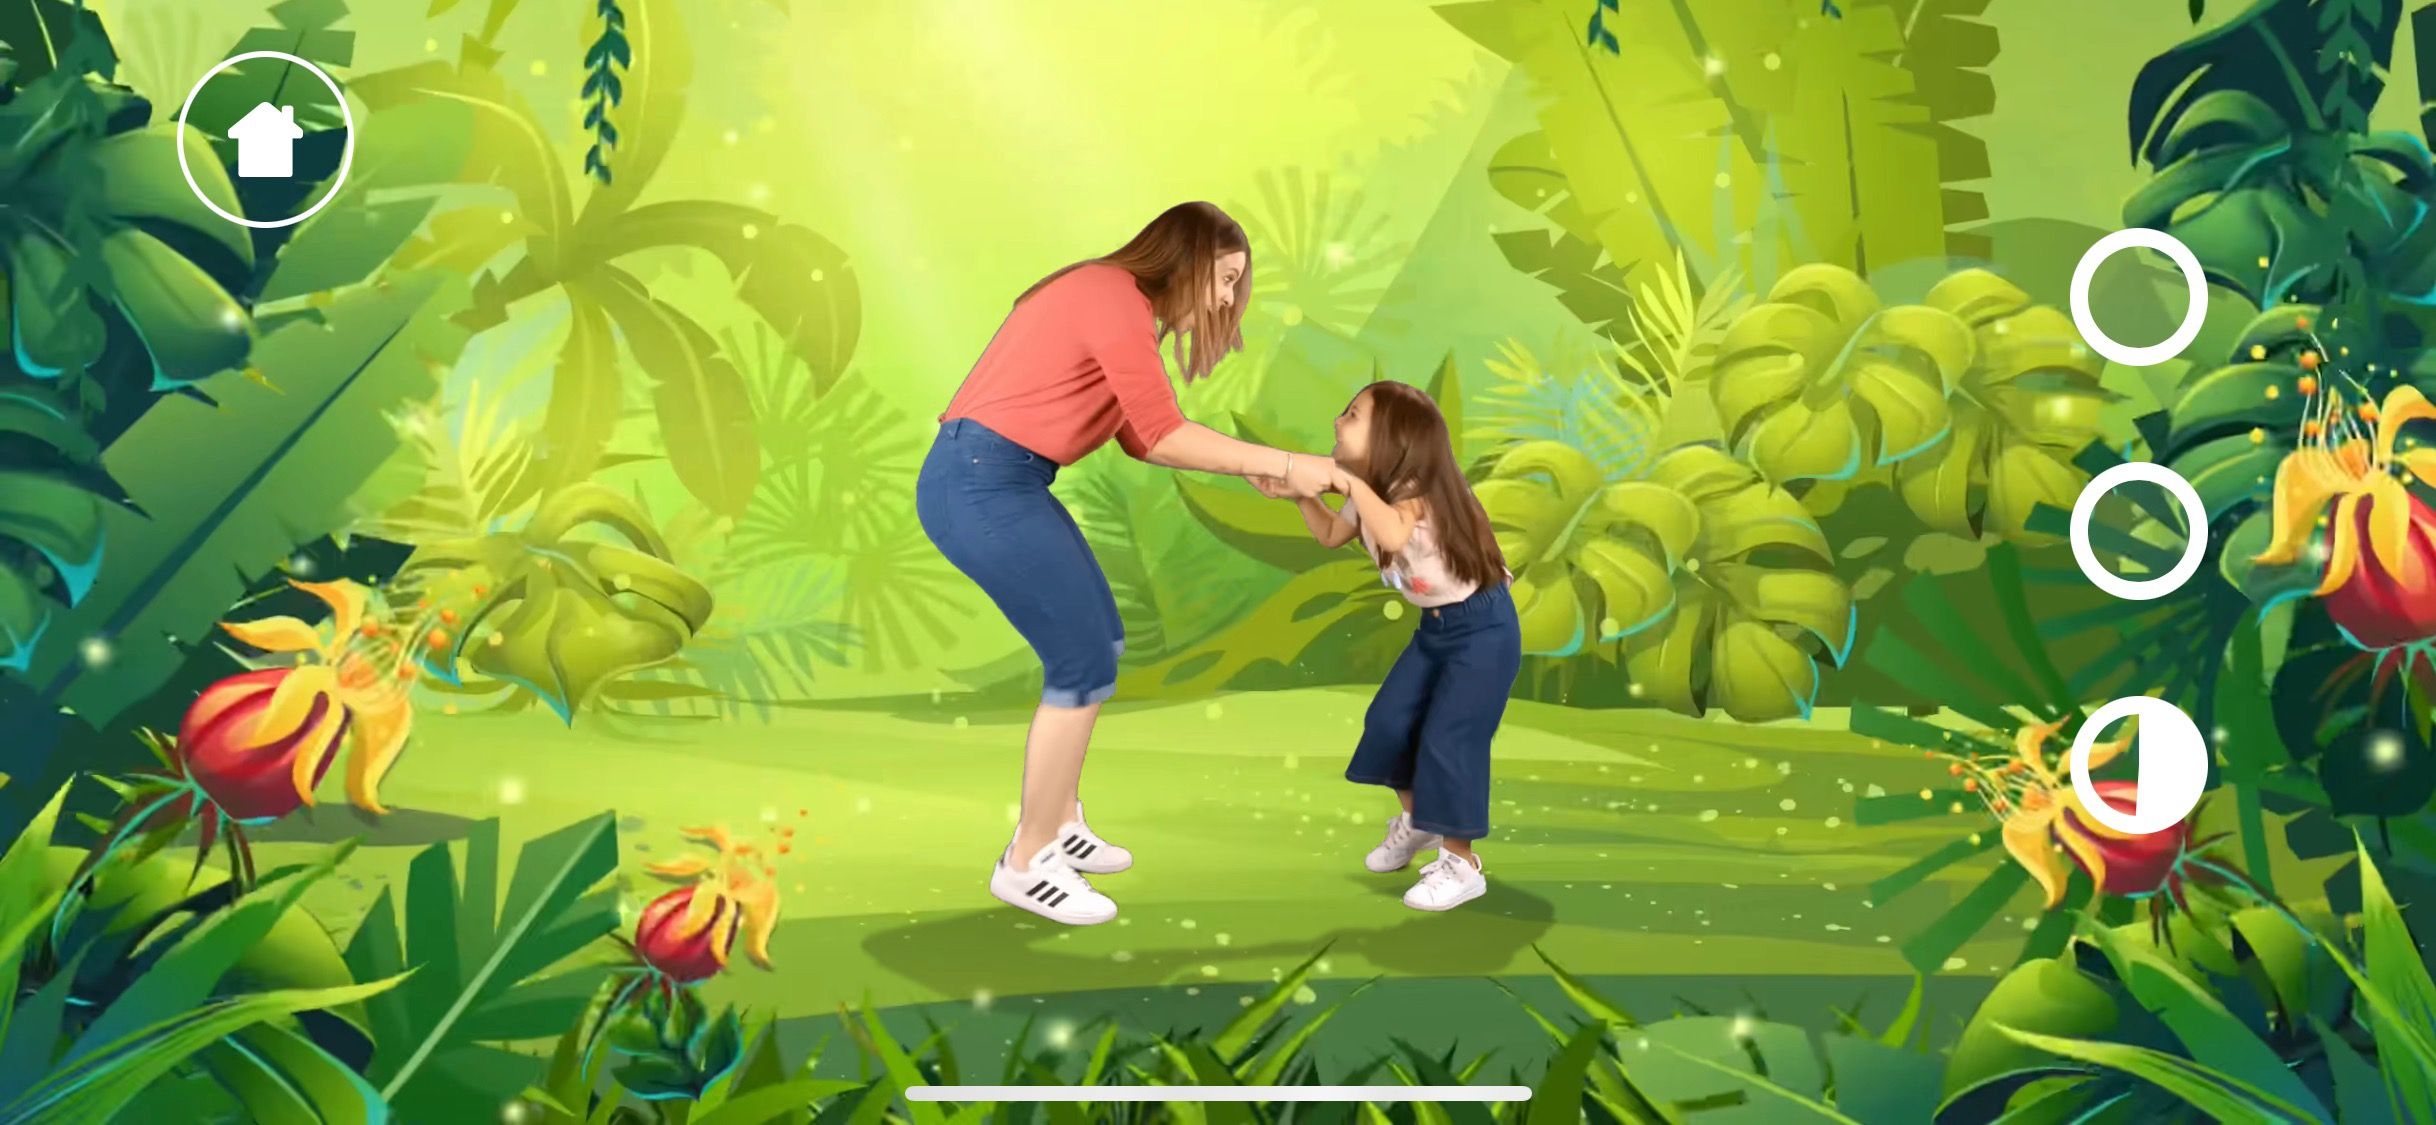 Screenshot of Wakeout for Kids app showing an adult and child on the exercise screen